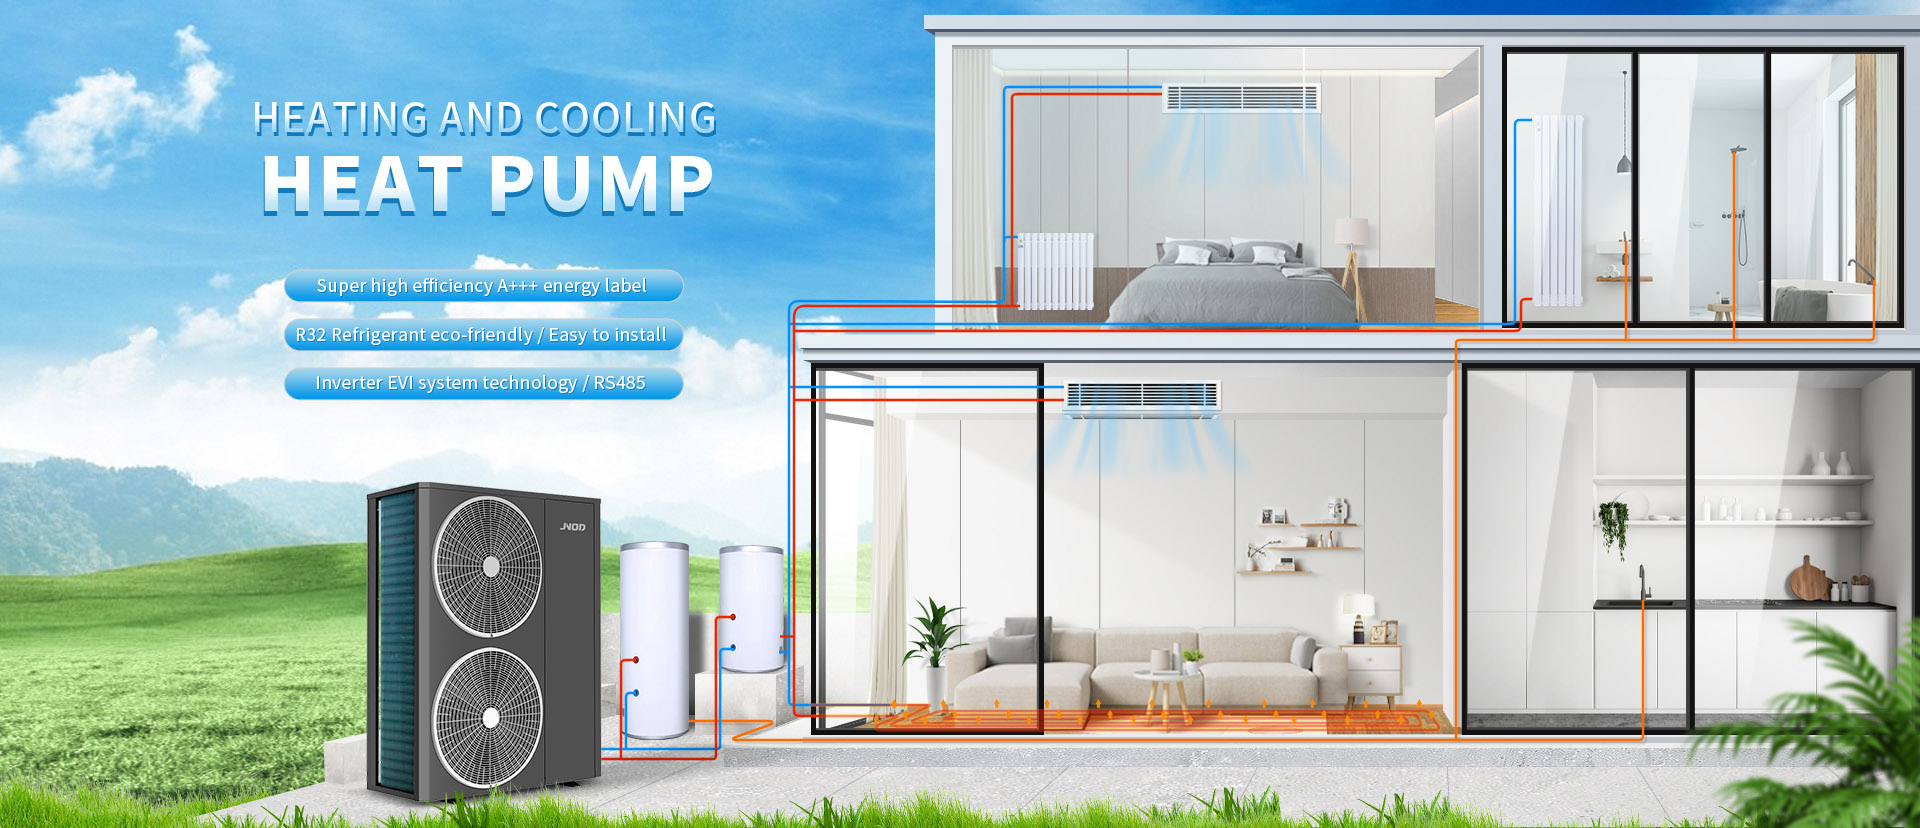 Heating And Cooling Heat Pump manufacture